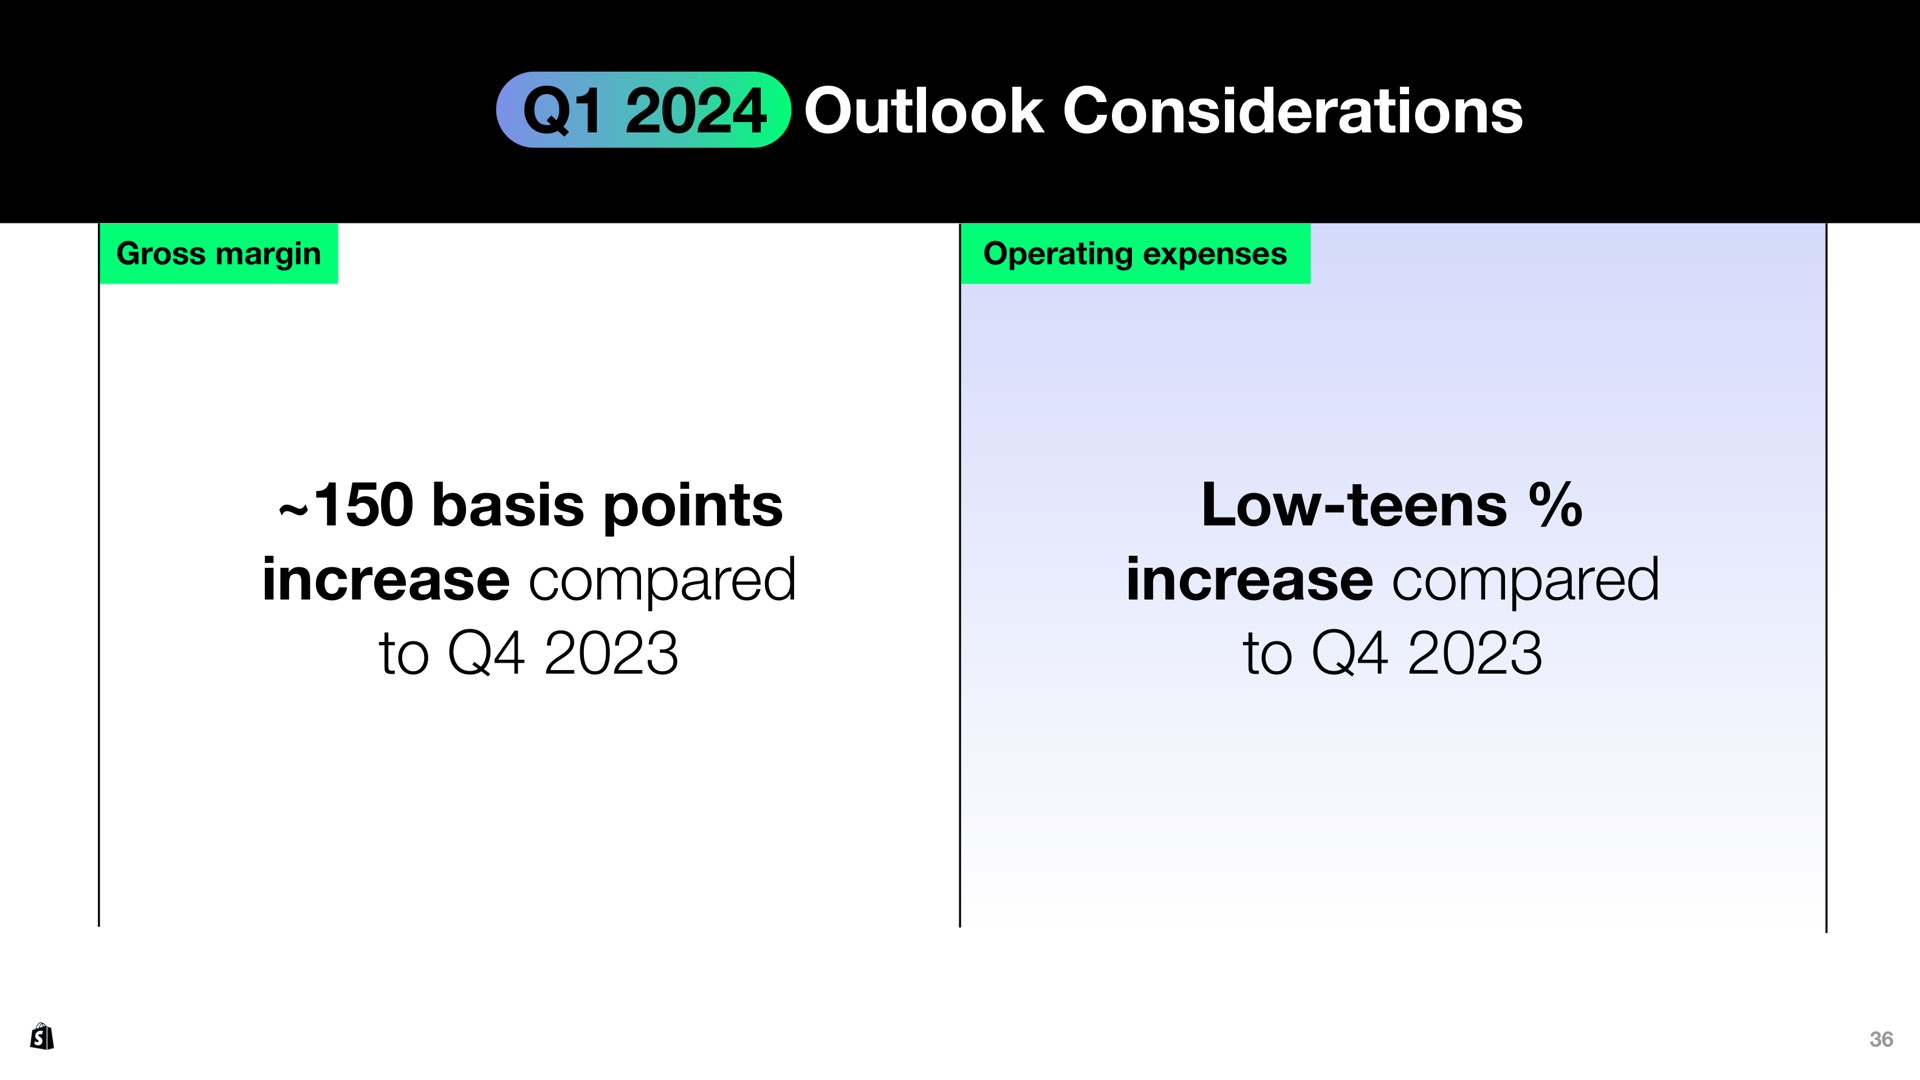 outlook considerations basis points increase compared to low teens increase compared to | Shopify